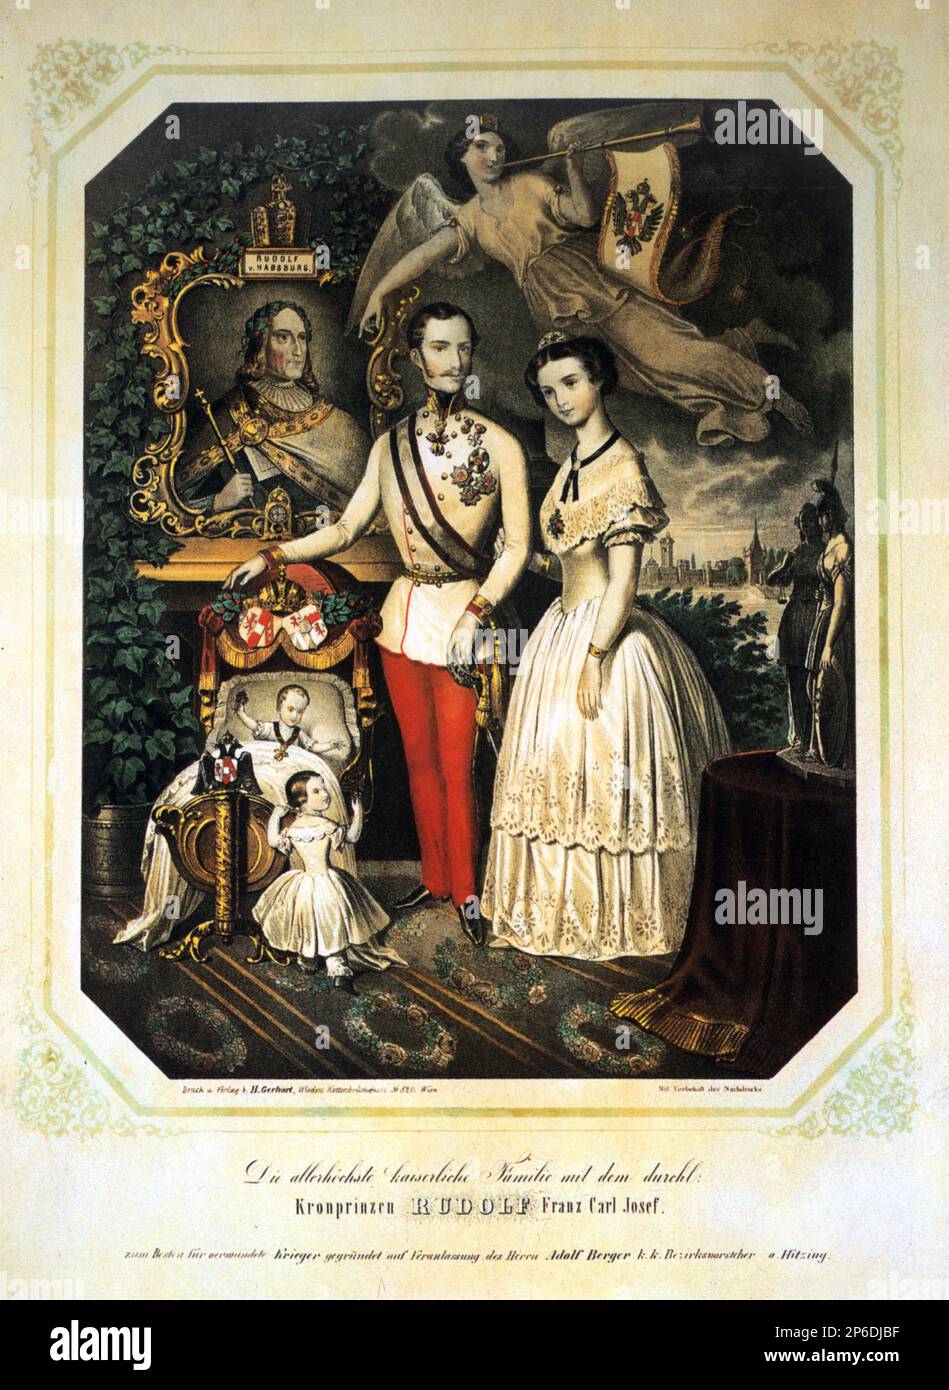 1859, AUSTRIA : The austrian kronprinz RUDOLF von ABSBURG ( 1850 - committed suicide at Mayerling 1889 ) , lover of Mary Von Vetsera . In this popular lithographyon with father Kaiser Franz Josef ( 1830 - 1916 ) , Emperor of Austria , King of Hungary and Bohemia and mother Empress Elisabeth von Bayer ( SISSI , 1937 - 1898 ).  In this image with first born GISELA . - FRANCESCO GIUSEPPE - JOSEPH - ABSBURG - ASBURG - ASBURGO - NOBILITY - NOBILI - Nobiltà - REALI - HABSBURG - HASBURG - ROYALTY - divisa militare - military uniform - baffi - moustache - principe ereditario - RODOLFO ----  Archivio G Stock Photo